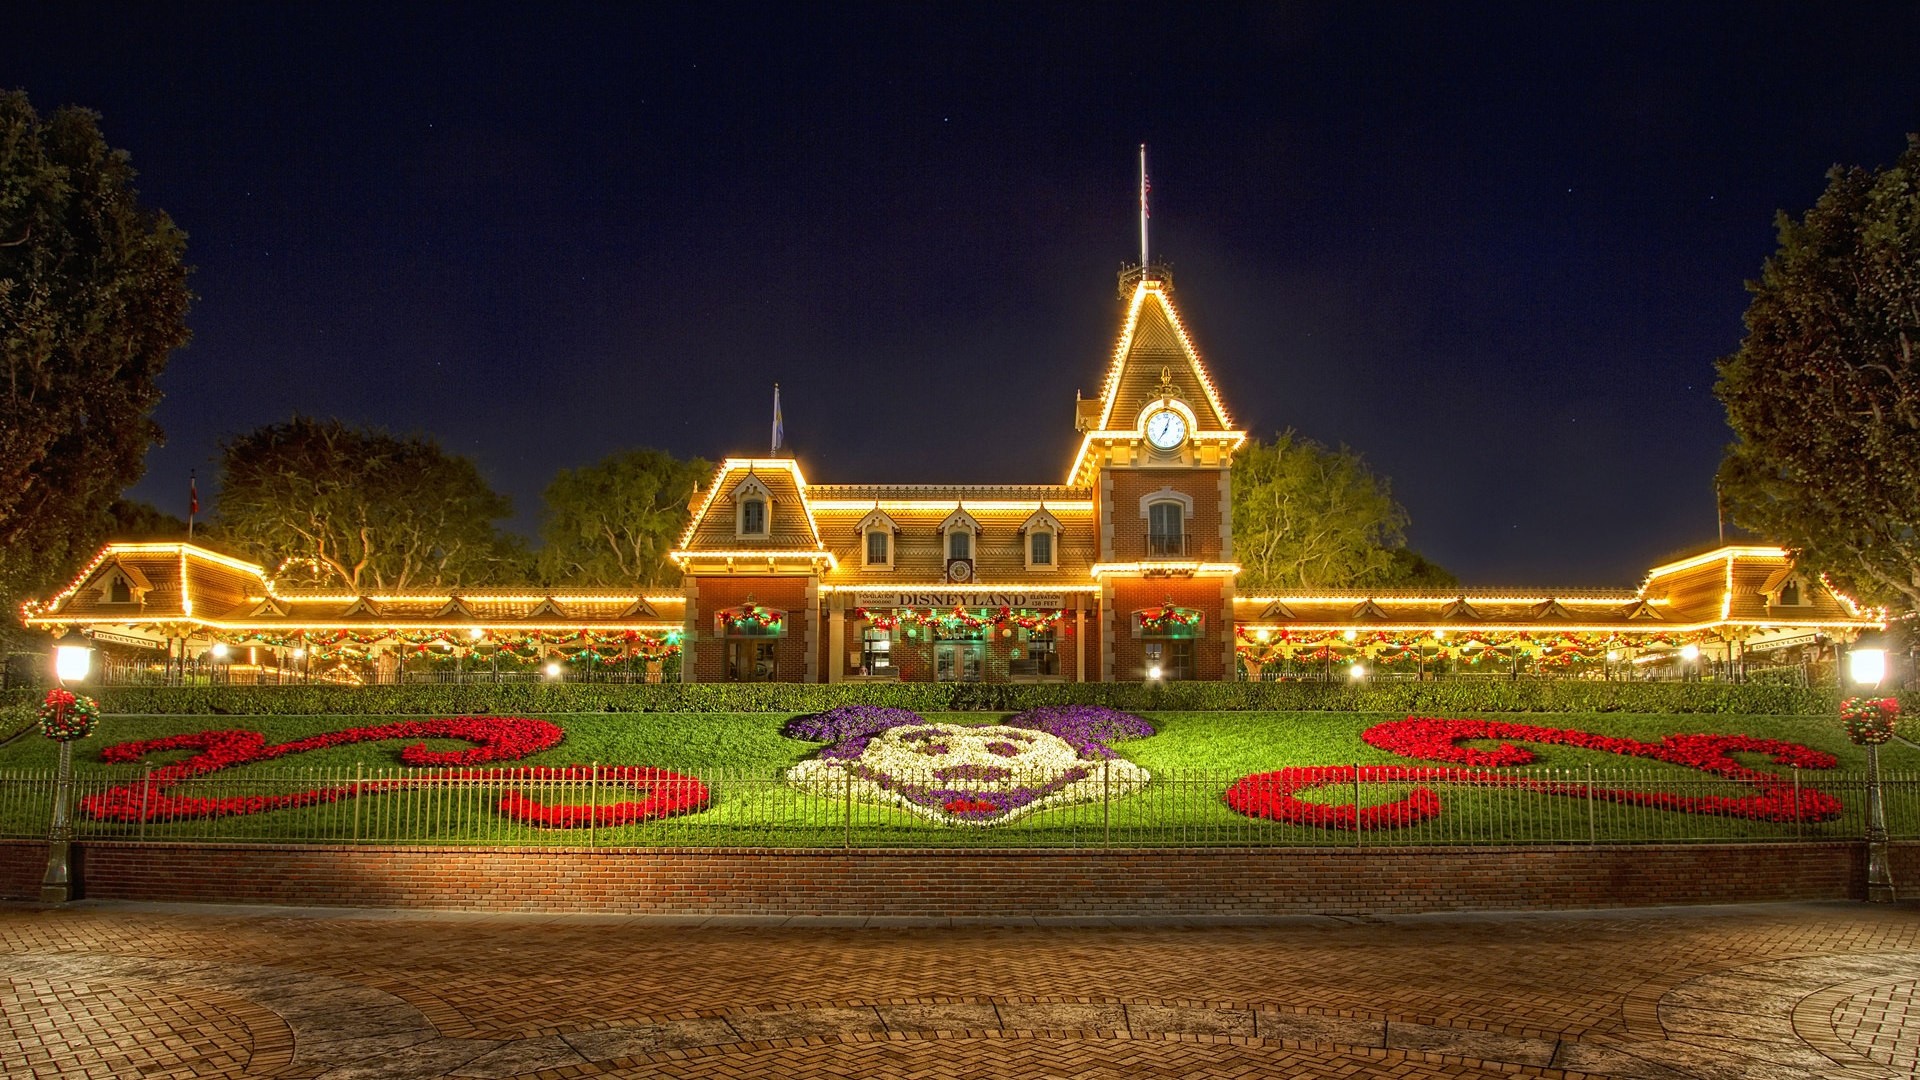 1920x1080  Christmas at Disneyland. How to set wallpaper on your desktop?  Click the download link from above and set the wallpaper on the desktop  from your ...